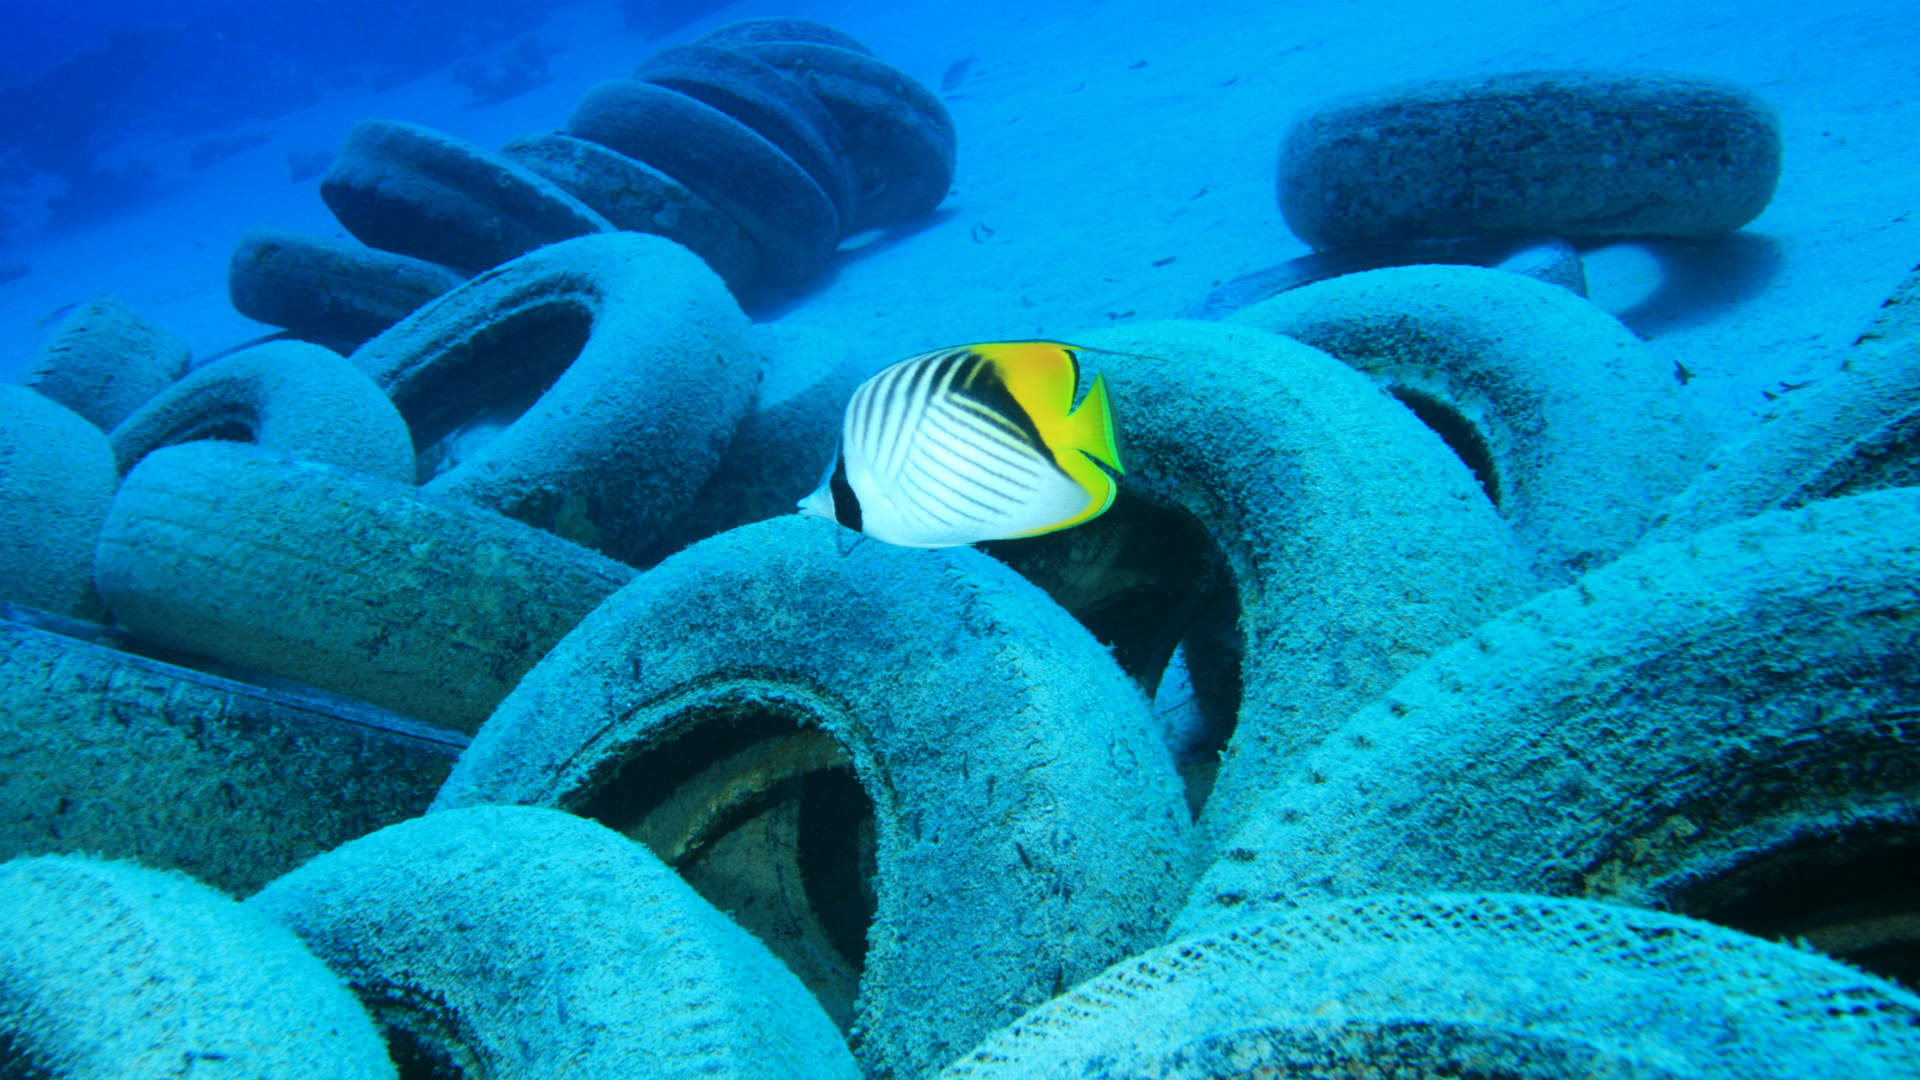 Car tyres a stealthy source of ocean pollution